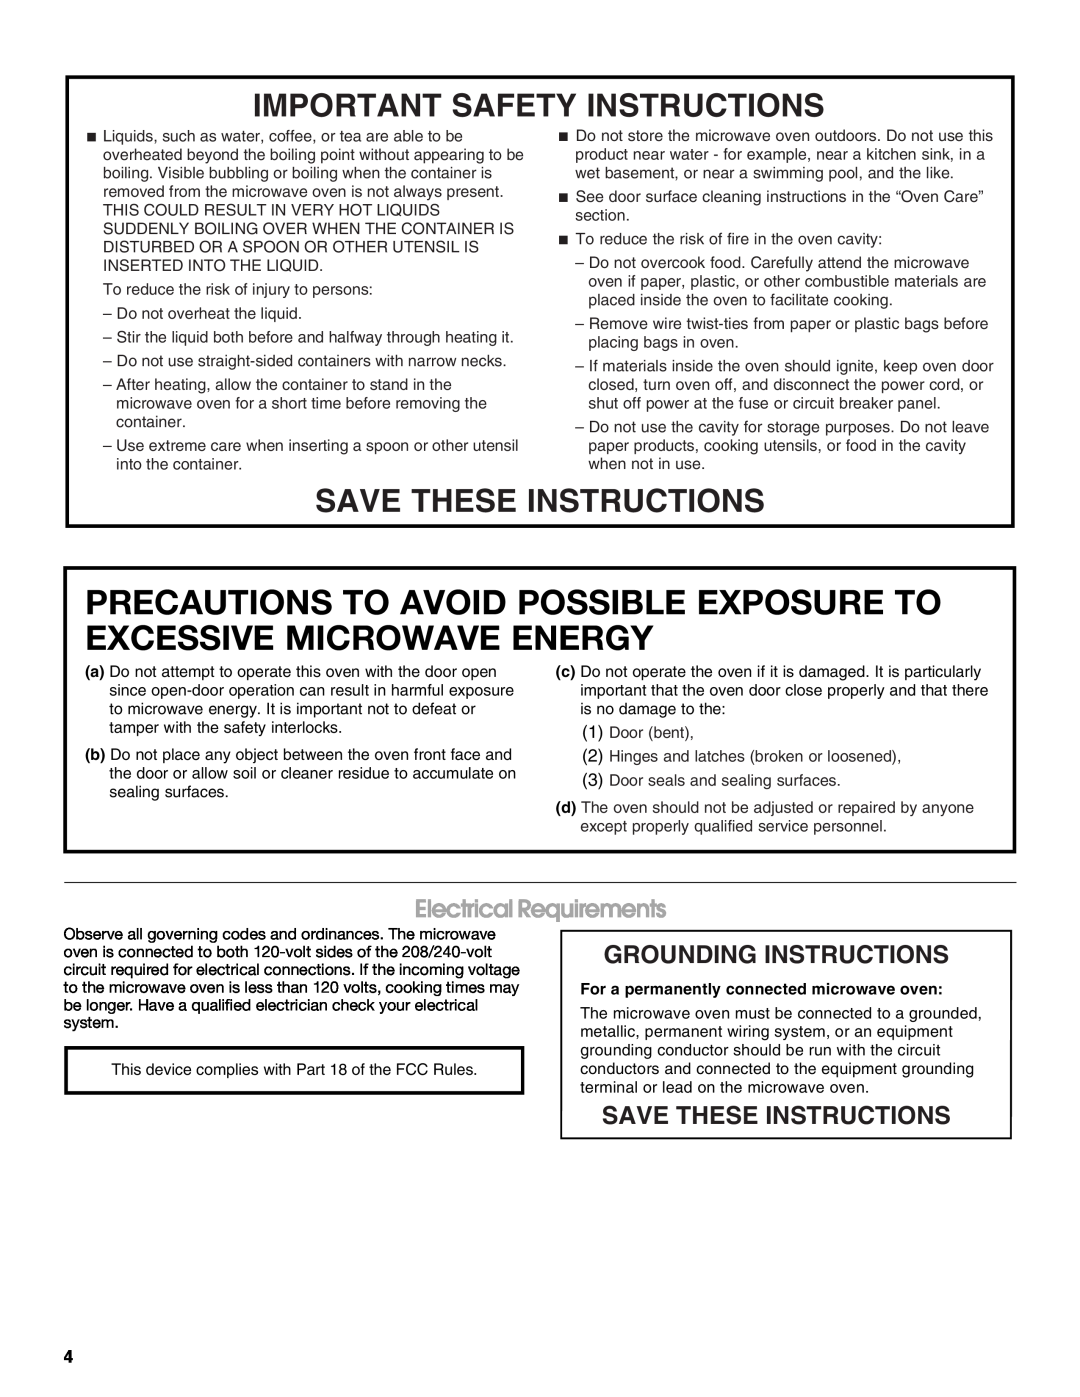 Jenn-Air JMC2130 Electrical Requirements, Grounding Instructions, Save These Instructions, Important Safety Instructions 